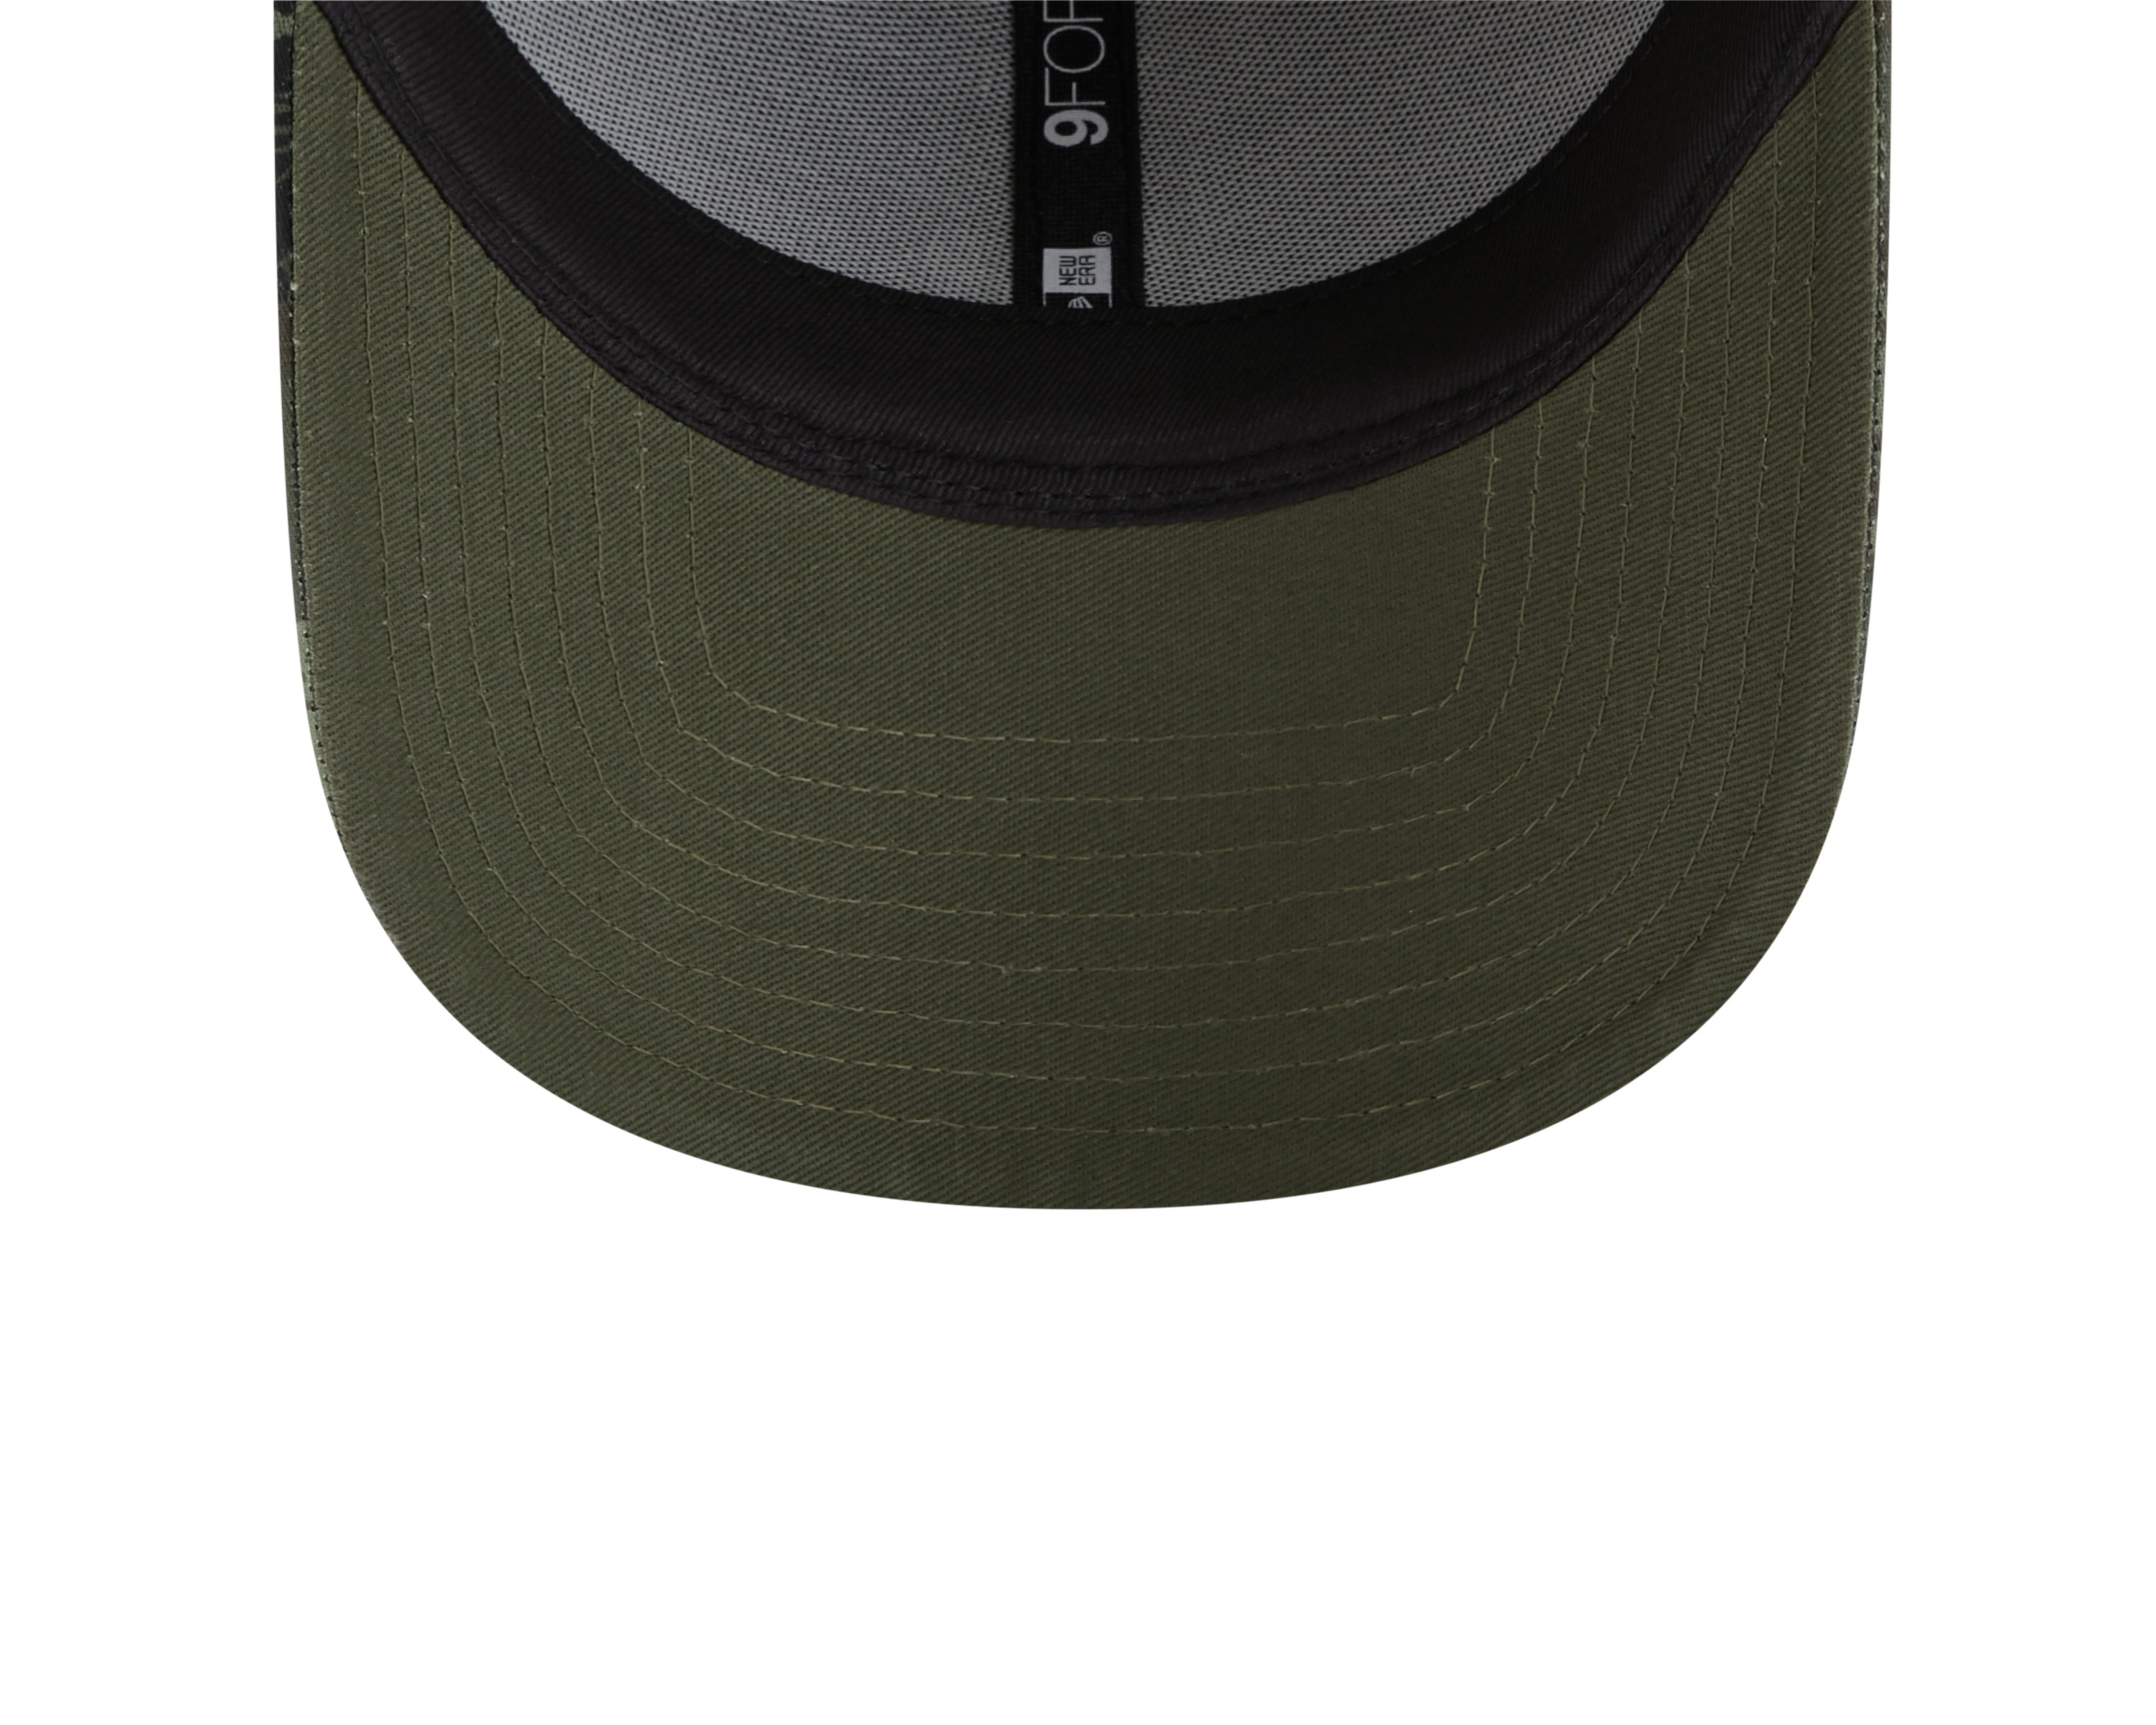 New Era Painted AOP 9forty - Los Angeles Dodgers - Green - Headz Up 